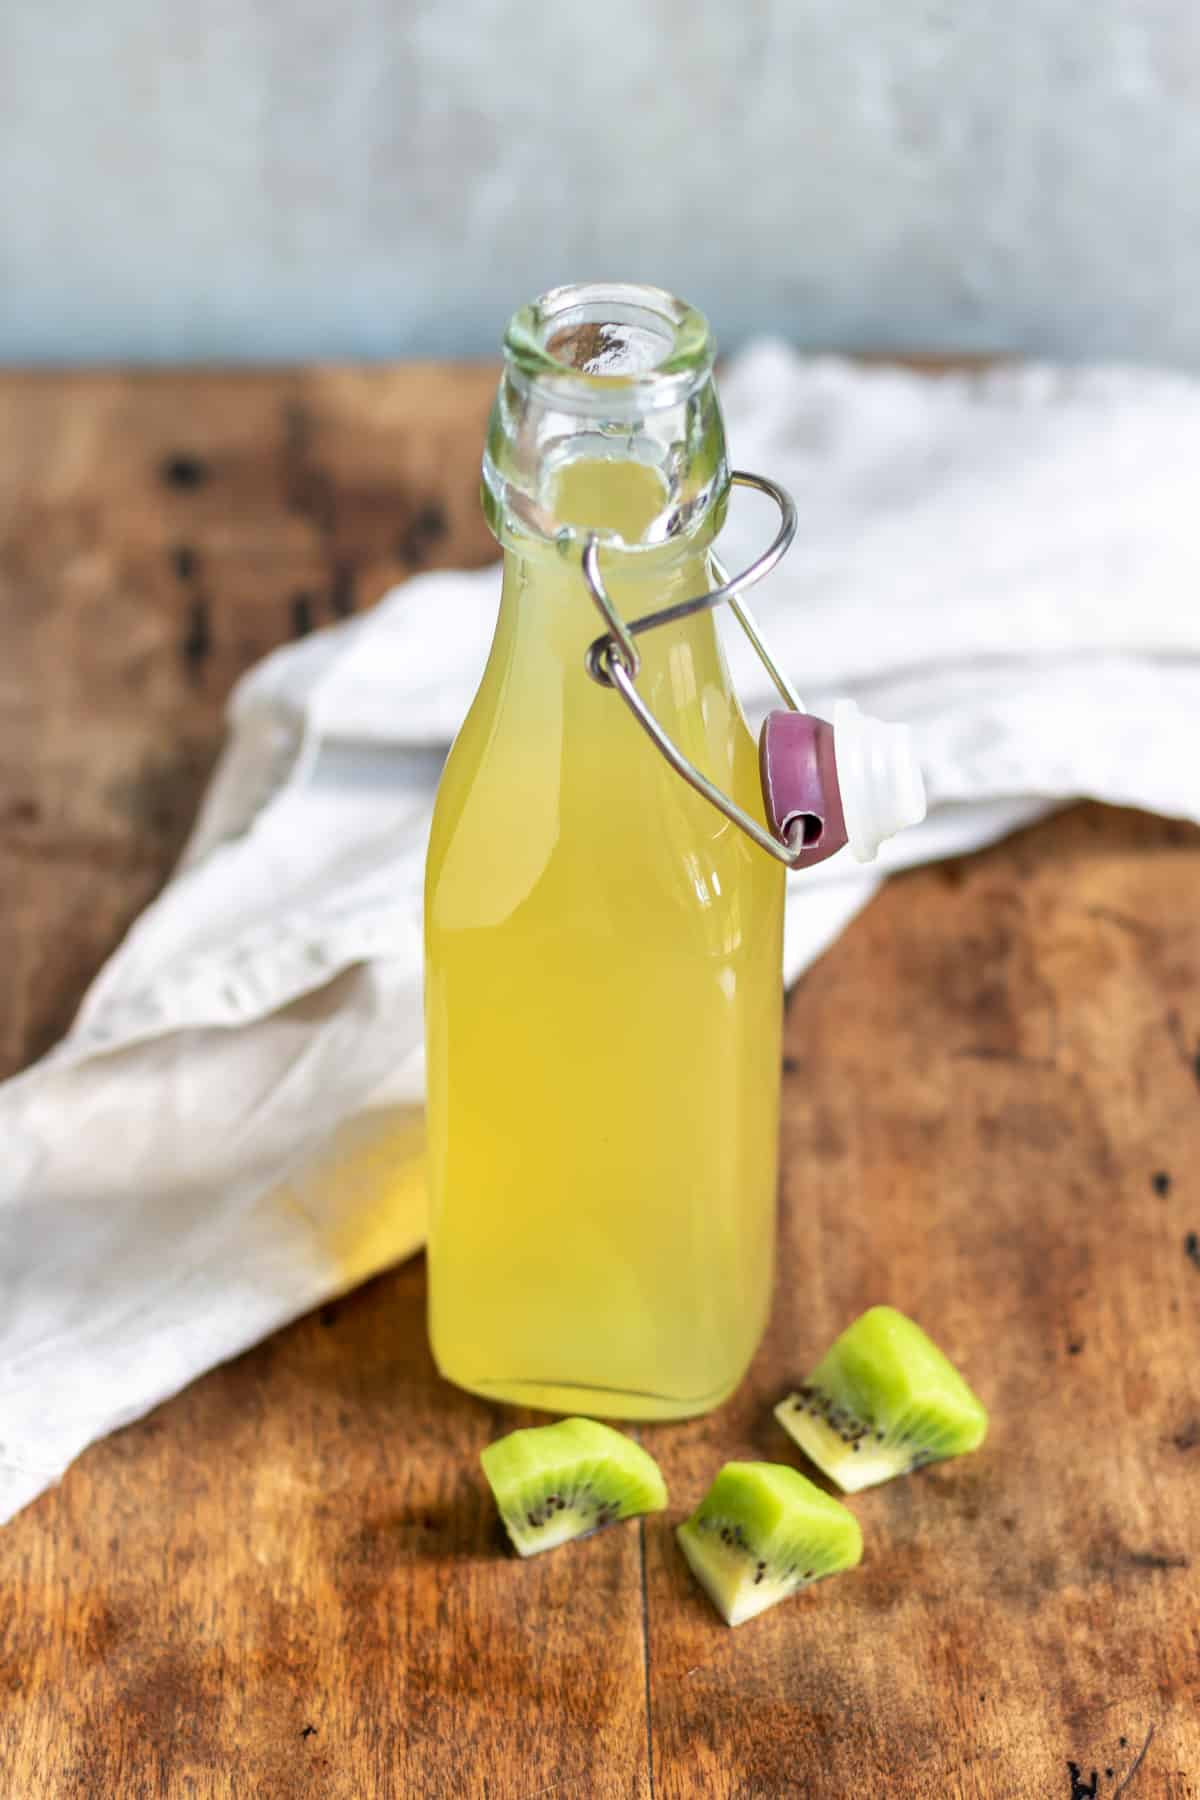 Wooden table with a bottle of kiwi syrup.